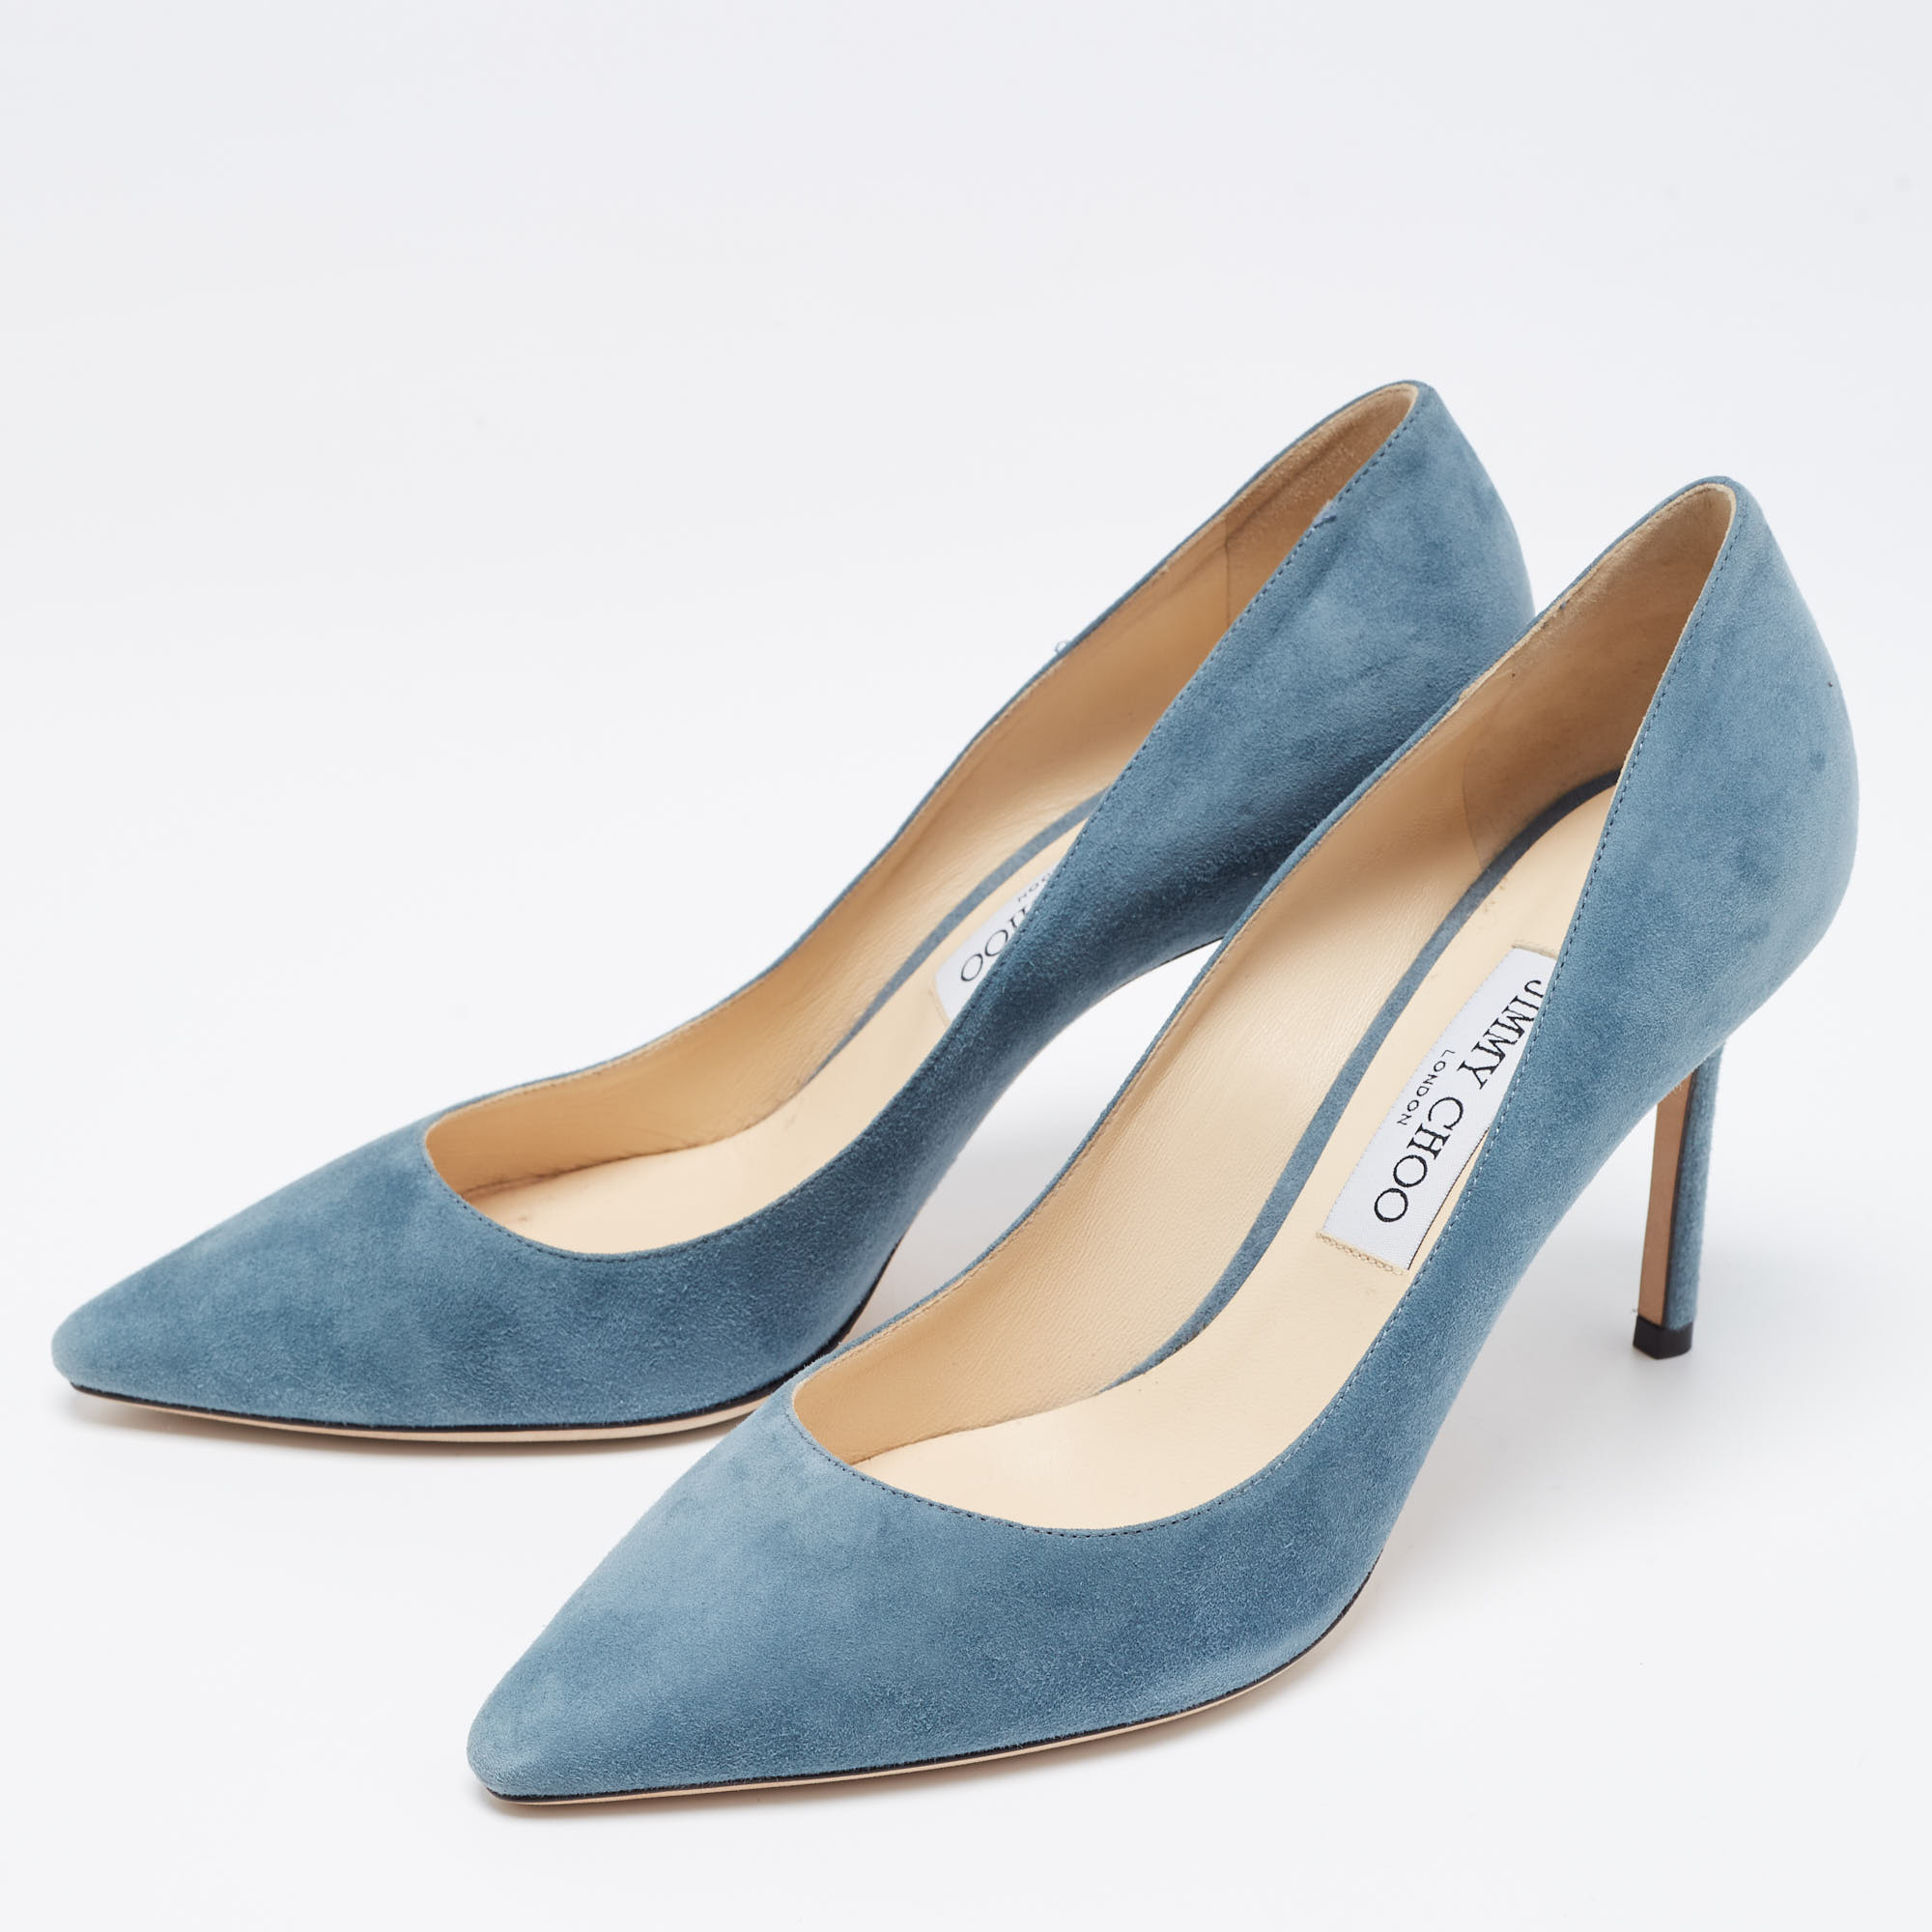 

Jimmy Choo Light Blue Suede Romy Pointed Toe Pumps Size